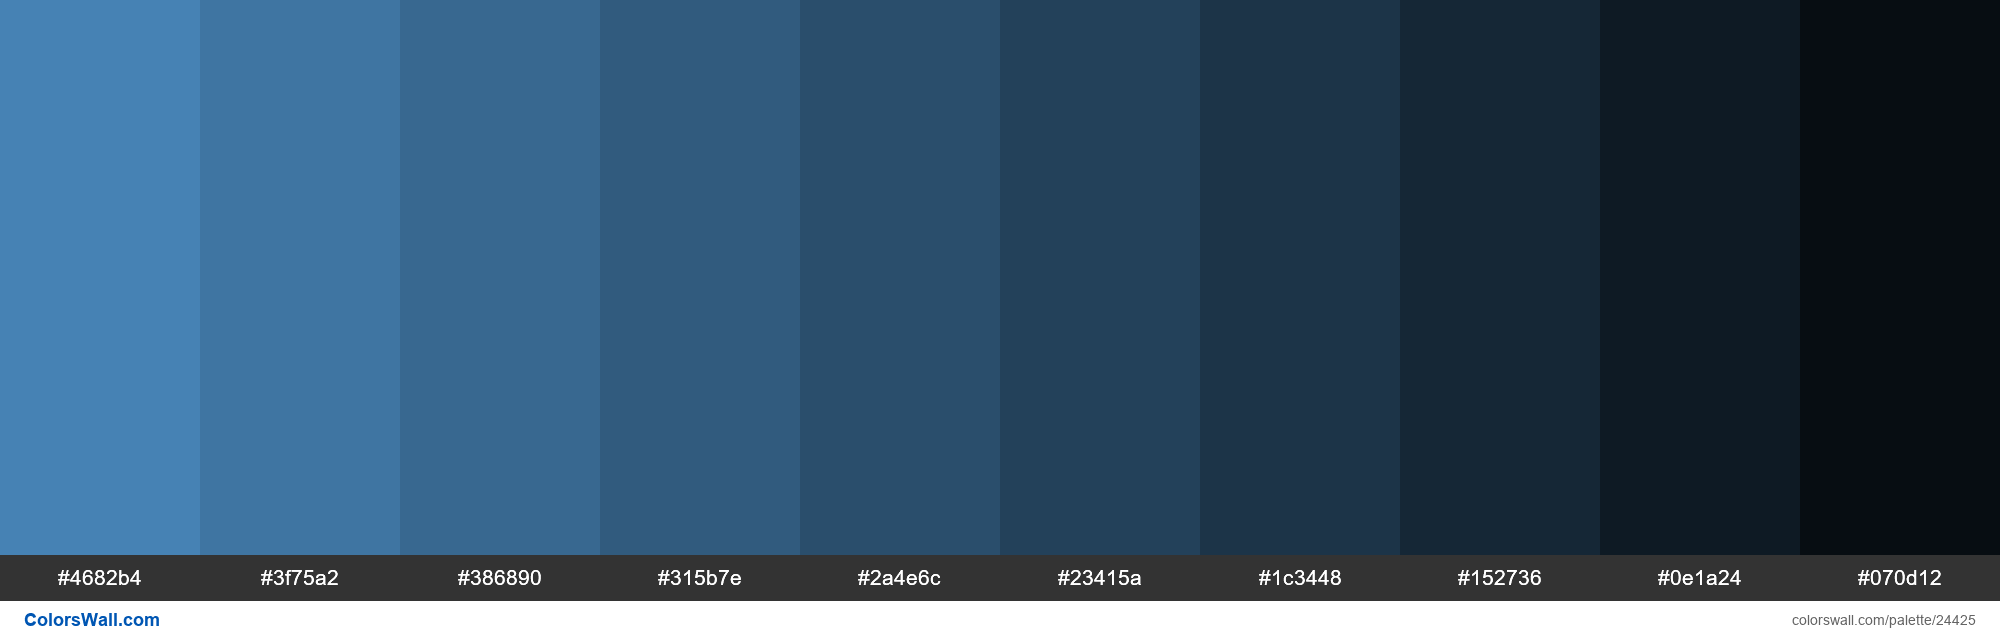 Shades Of Steelblue 46b4 Hex Color Hex Rgb Codes